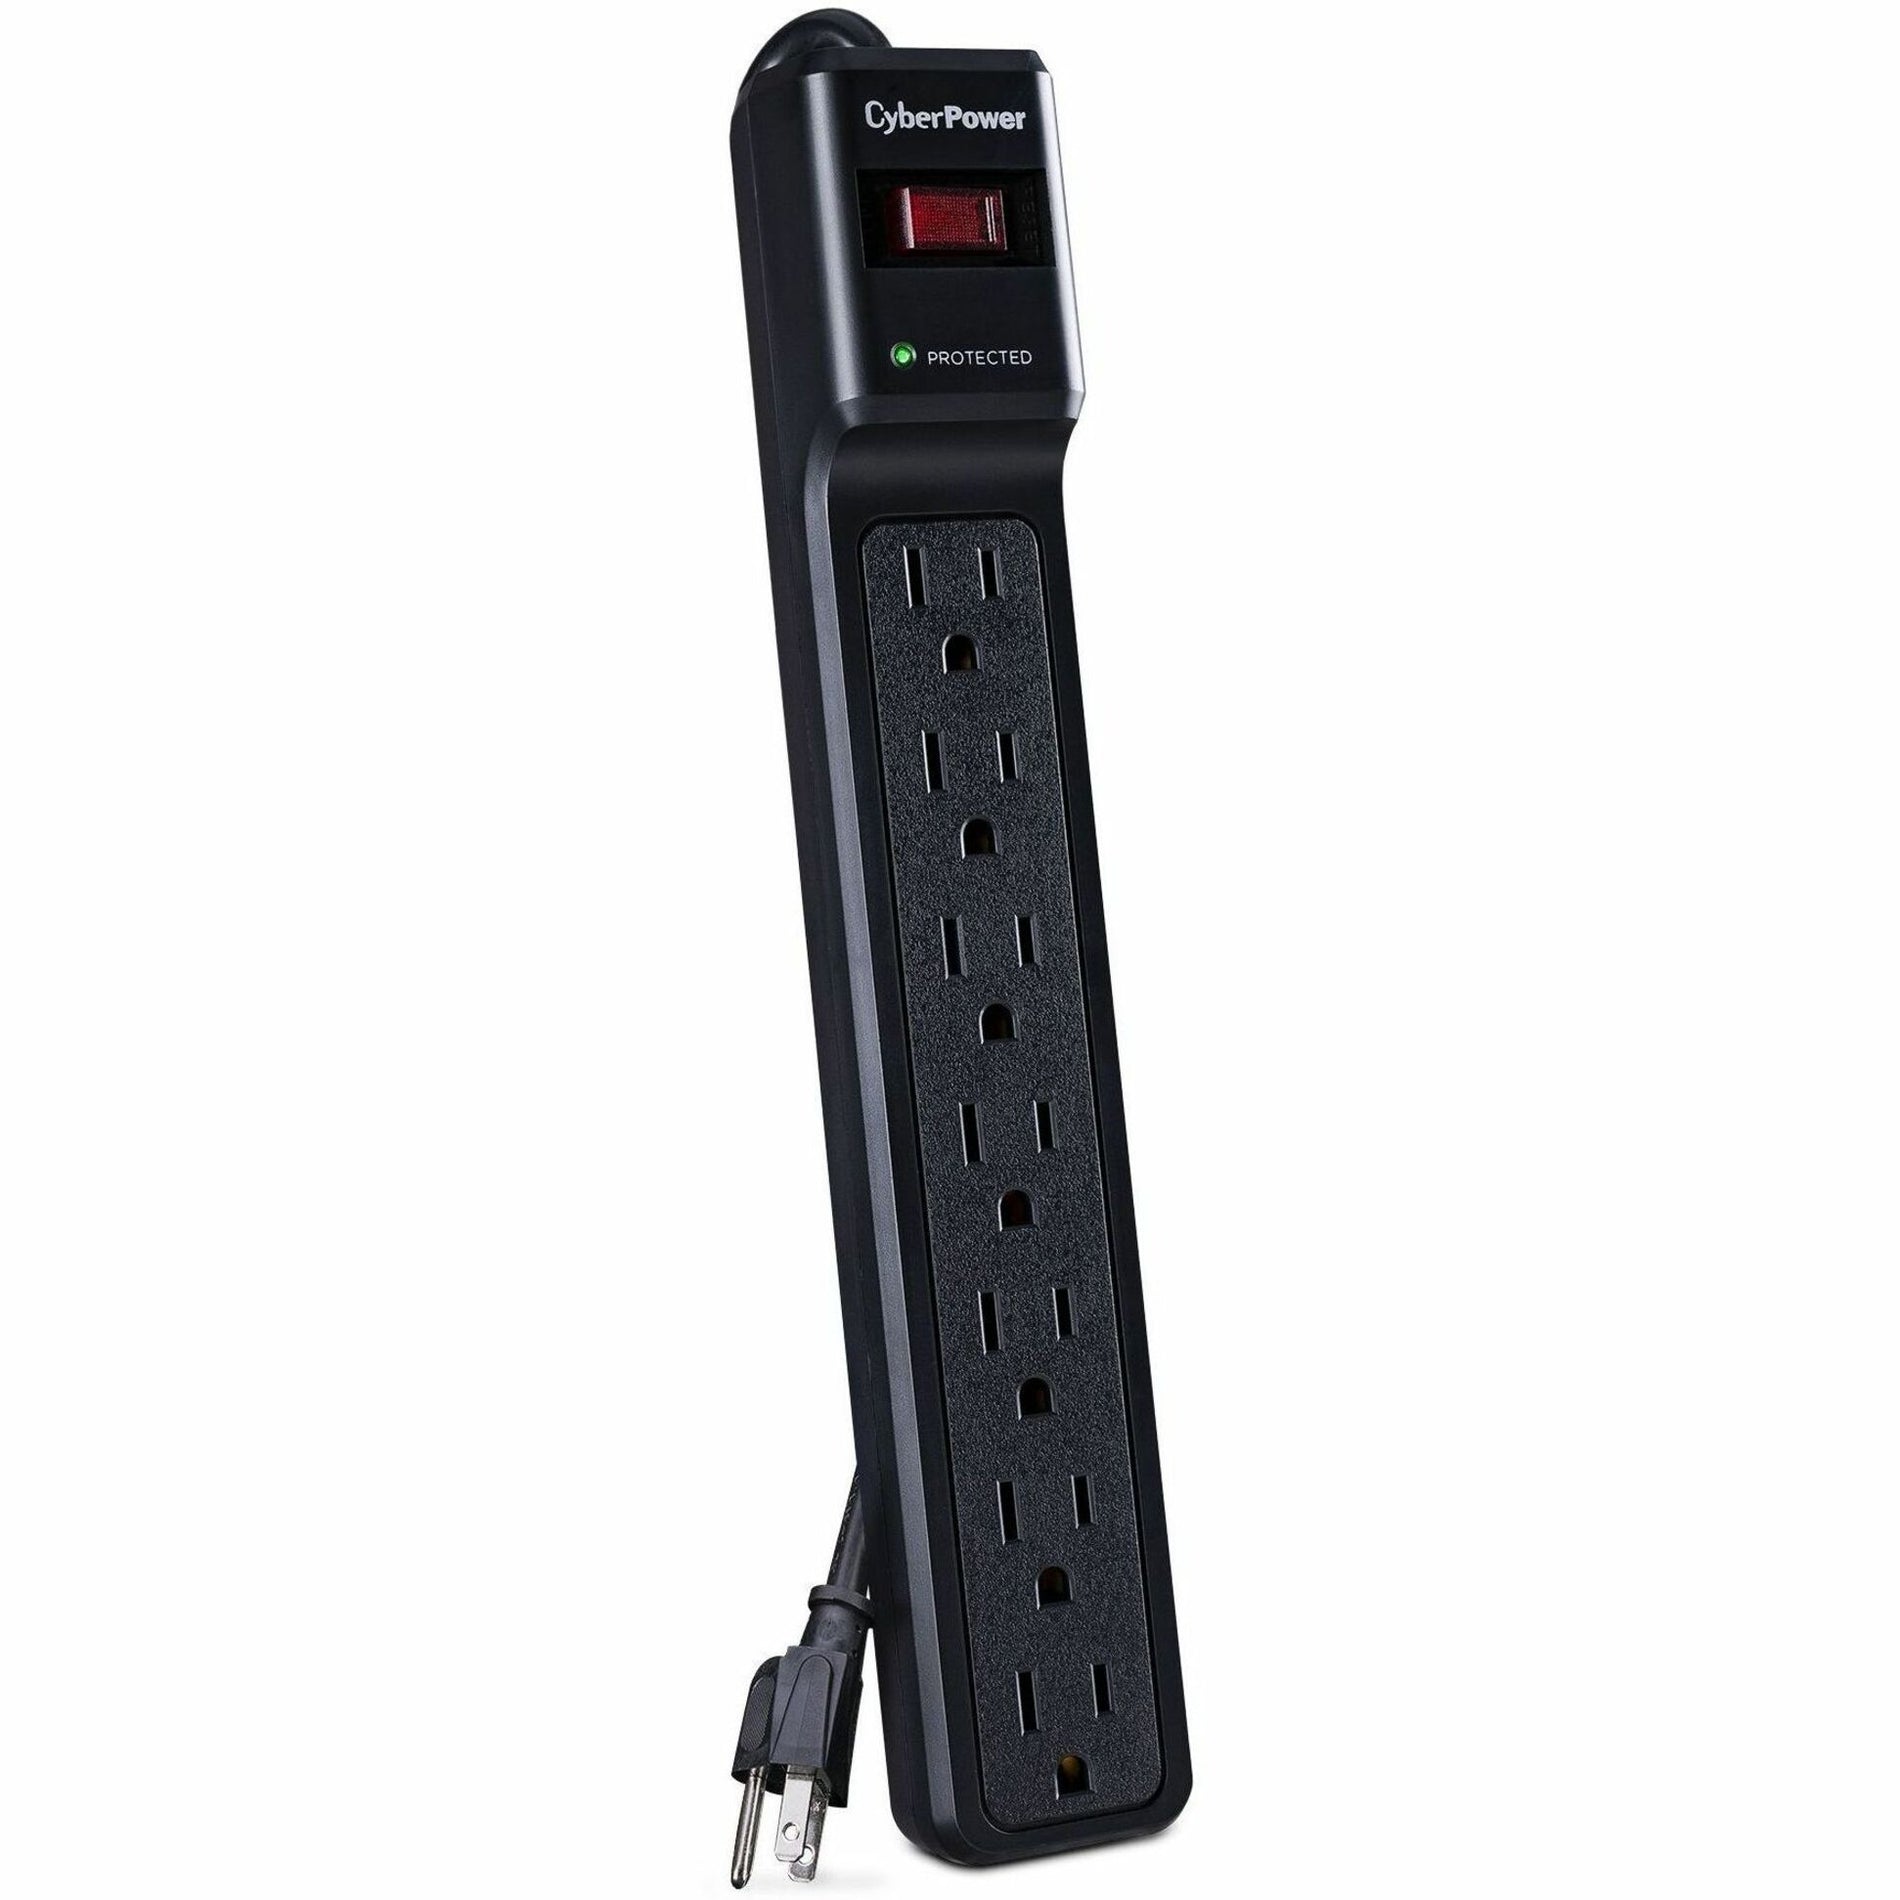 CyberPower CSB7012 Essential 7-Outlets Surge Suppressor with 1500 Joules and 12FT Cord, Lifetime Warranty, EMI/RFI Filters